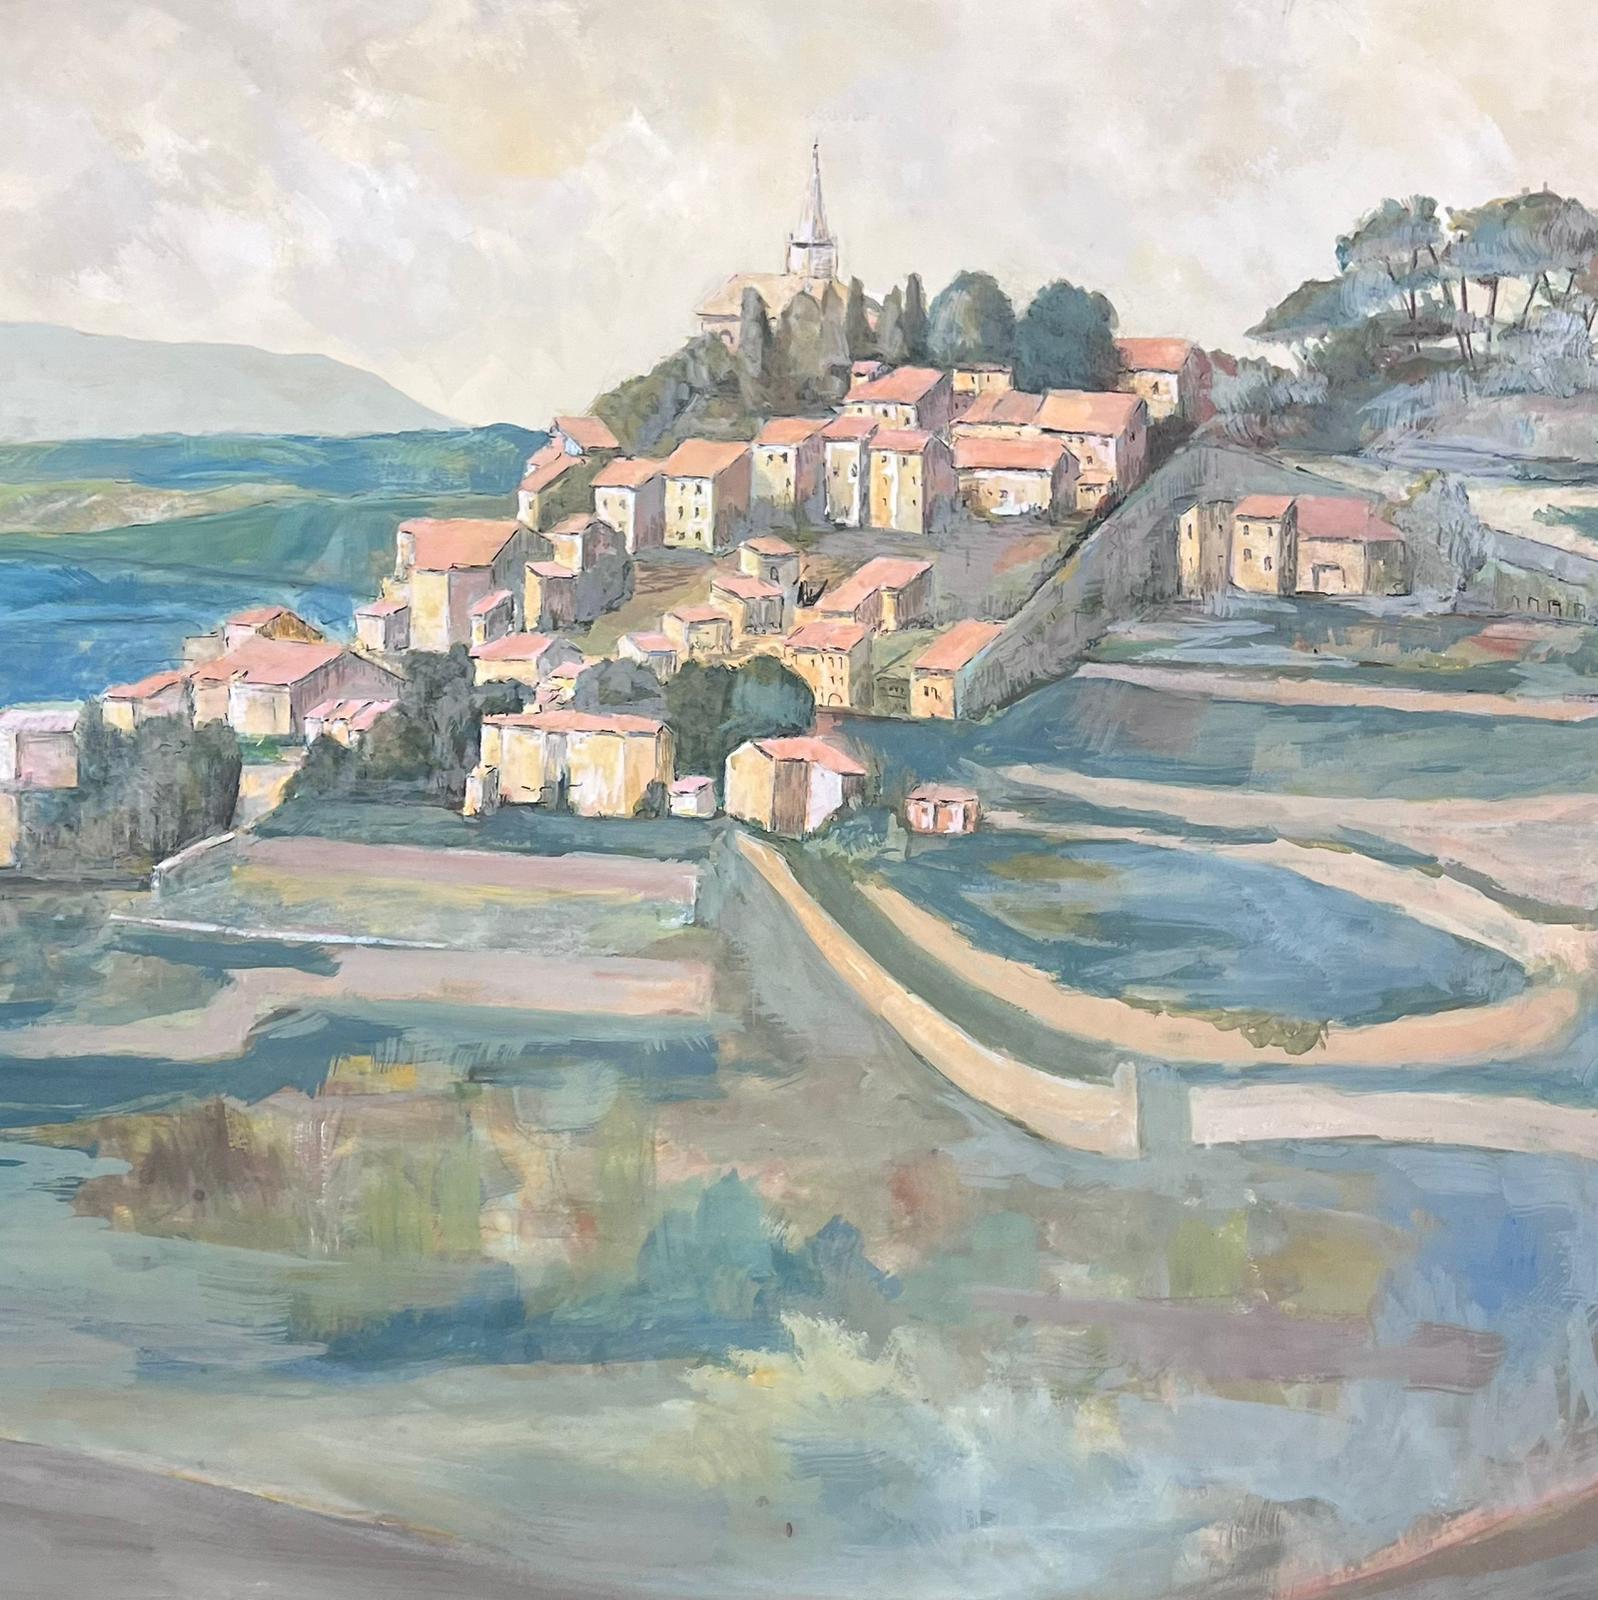 French Landscape
by Bernard Labbe (French mid 20th century) 
original gouache on artist paper
size: 20 x 25 inches
condition: very good and ready to be enjoyed

provenance: the artists atelier/ studio, France (stamped verso)